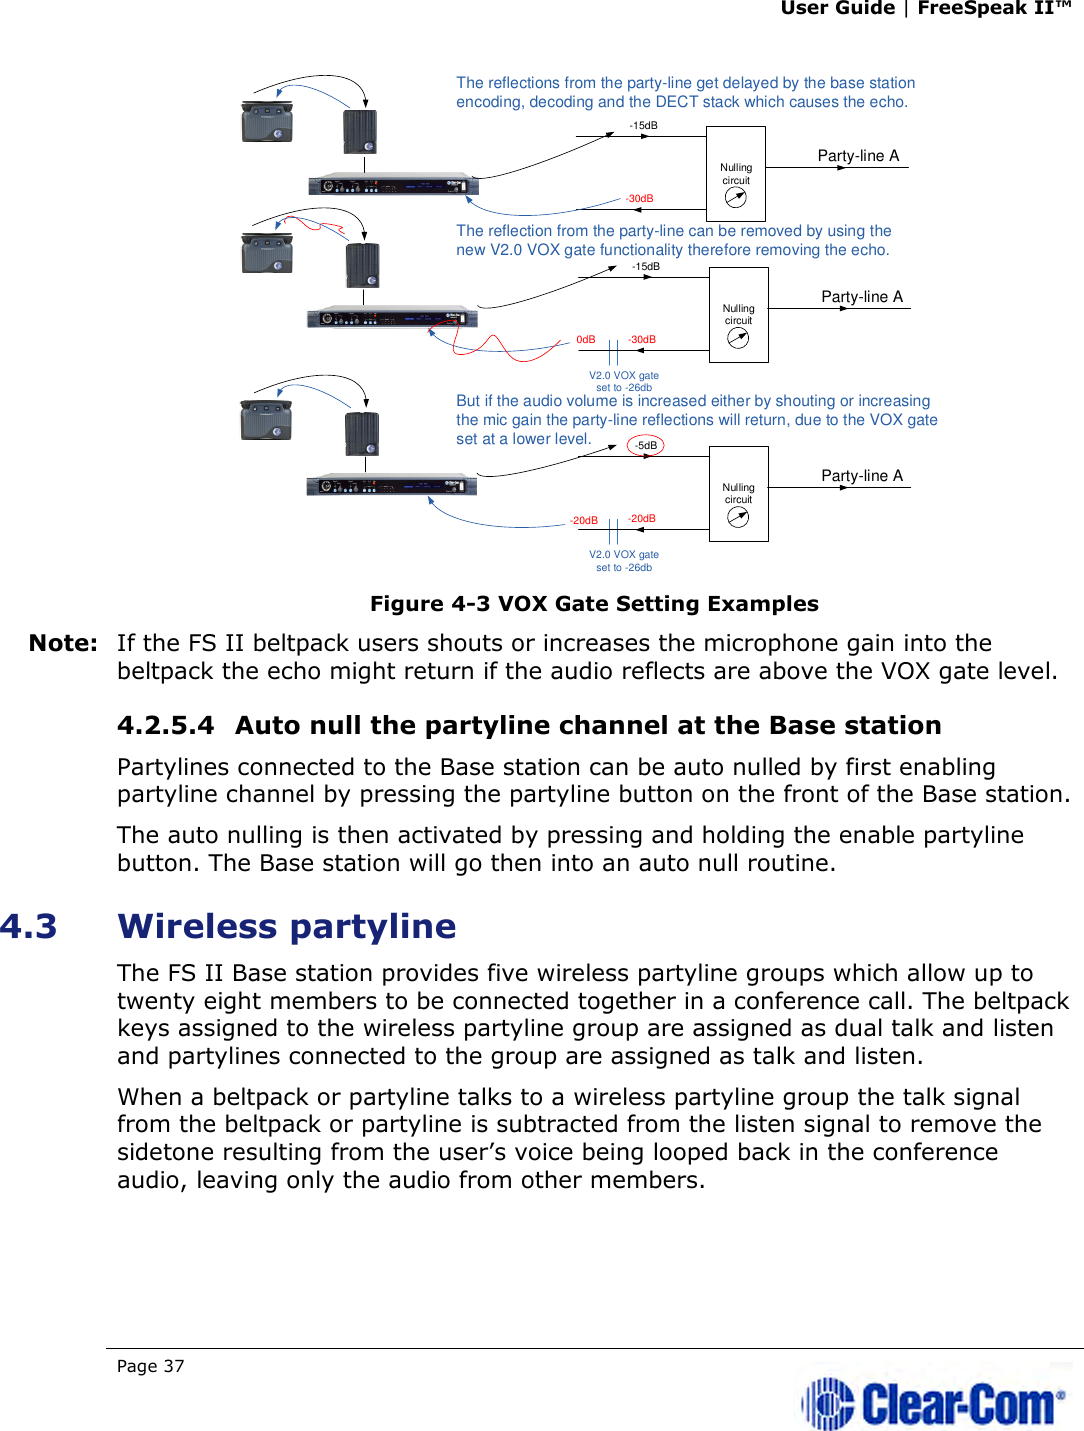 User Guide | FreeSpeak II™  Page 37    Figure 4-3 VOX Gate Setting Examples Note: If the FS II beltpack users shouts or increases the microphone gain into the beltpack the echo might return if the audio reflects are above the VOX gate level.  4.2.5.4 Auto null the partyline channel at the Base station Partylines connected to the Base station can be auto nulled by first enabling partyline channel by pressing the partyline button on the front of the Base station. The auto nulling is then activated by pressing and holding the enable partyline button. The Base station will go then into an auto null routine. 4.3 Wireless partyline The FS II Base station provides five wireless partyline groups which allow up to twenty eight members to be connected together in a conference call. The beltpack keys assigned to the wireless partyline group are assigned as dual talk and listen and partylines connected to the group are assigned as talk and listen. When a beltpack or partyline talks to a wireless partyline group the talk signal from the beltpack or partyline is subtracted from the listen signal to remove the sidetone resulting from the user’s voice being looped back in the conference audio, leaving only the audio from other members. Party-line A Nulling circuit -15dB-30dBThe reflections from the party-line get delayed by the base station encoding, decoding and the DECT stack which causes the echo. V2.0 VOX gate set to -26db 0dBParty-line A Nulling circuit -15dB-30dBV2.0 VOX gate set to -26db  -20dBParty-line A Nulling circuit -5dB-20dBThe reflection from the party-line can be removed by using the new V2.0 VOX gate functionality therefore removing the echo. But if the audio volume is increased either by shouting or increasing the mic gain the party-line reflections will return, due to the VOX gate set at a lower level. 